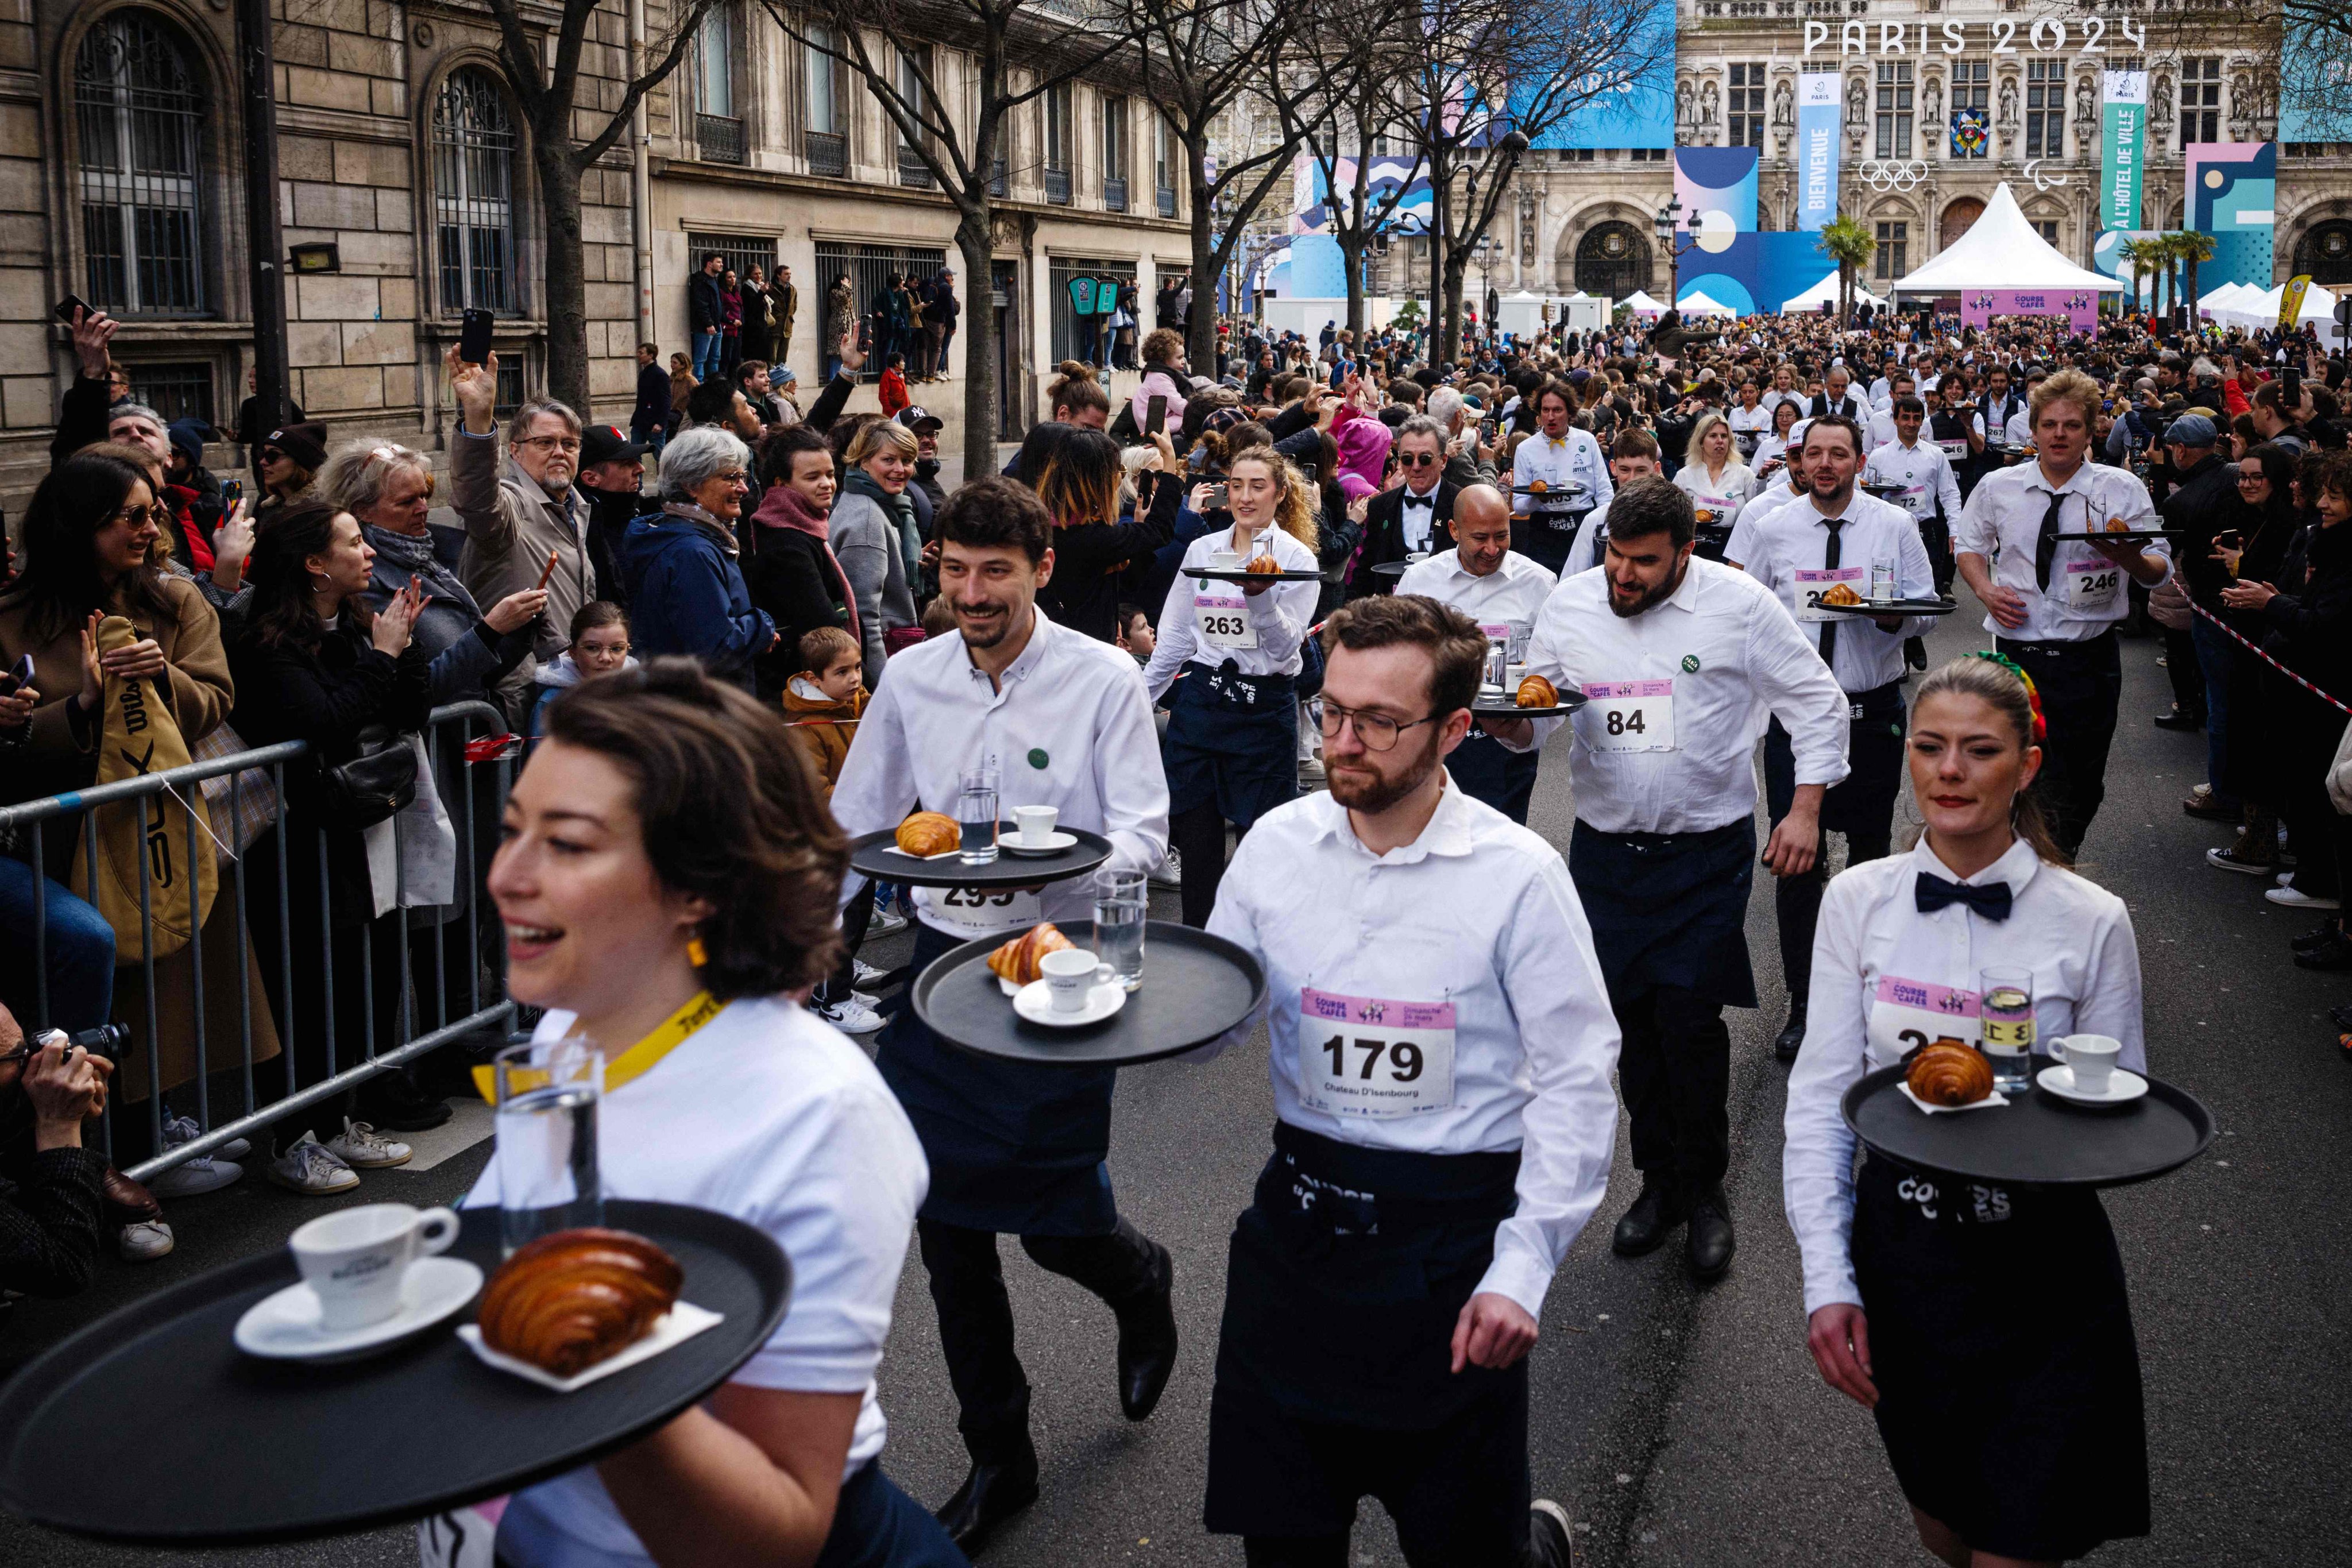 Waiters and waitresses at the start of the traditional “Course des cafes” (the cafes’ race), in front of the City Hall in central Paris, France on Sunday. Photo: AFP